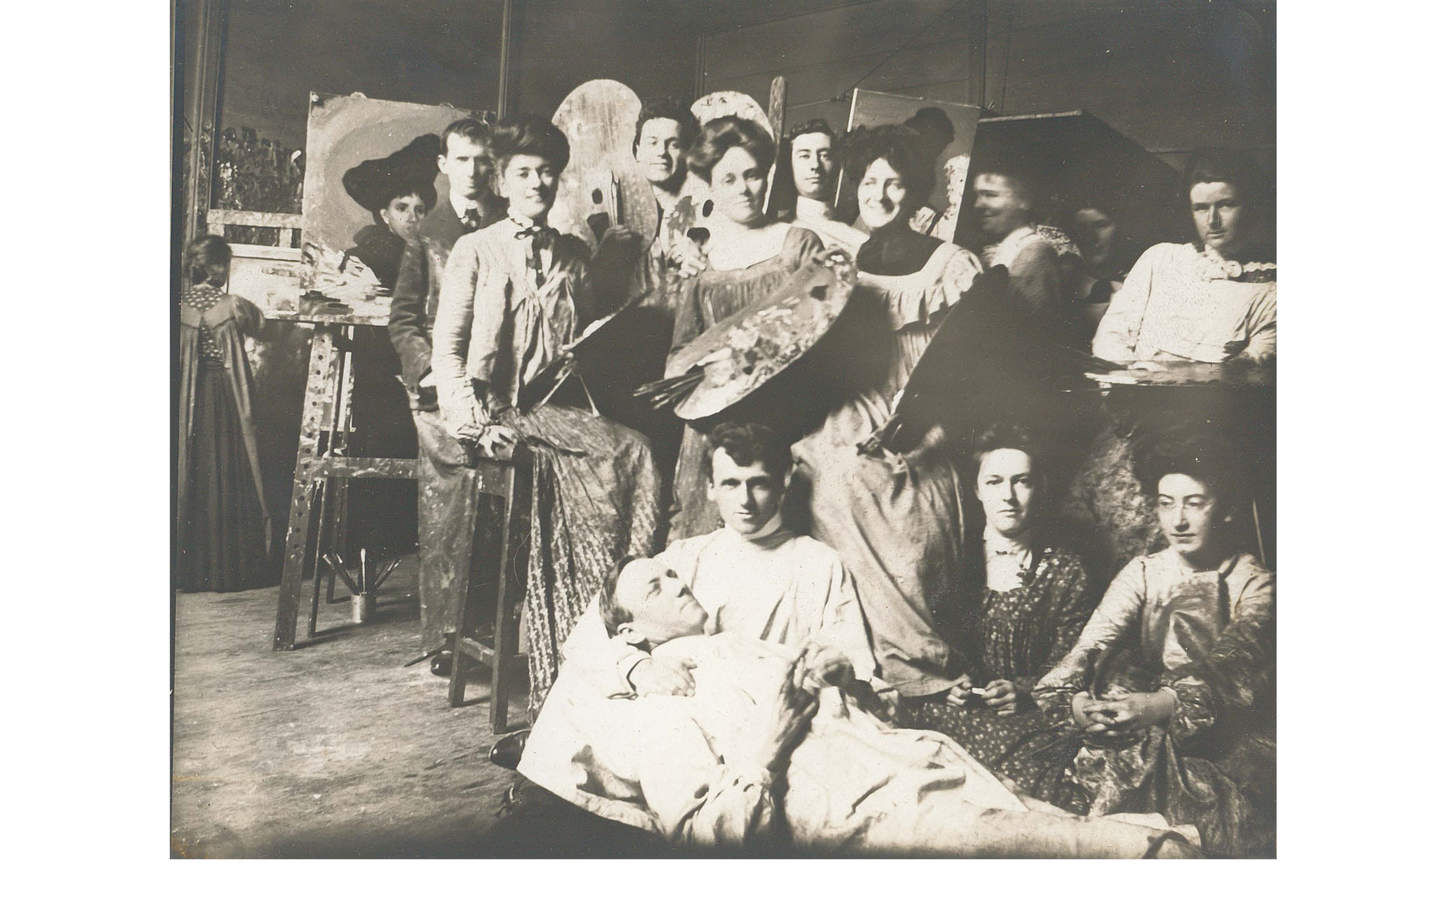 Black and white photograph of men and women student artists seated and standing.